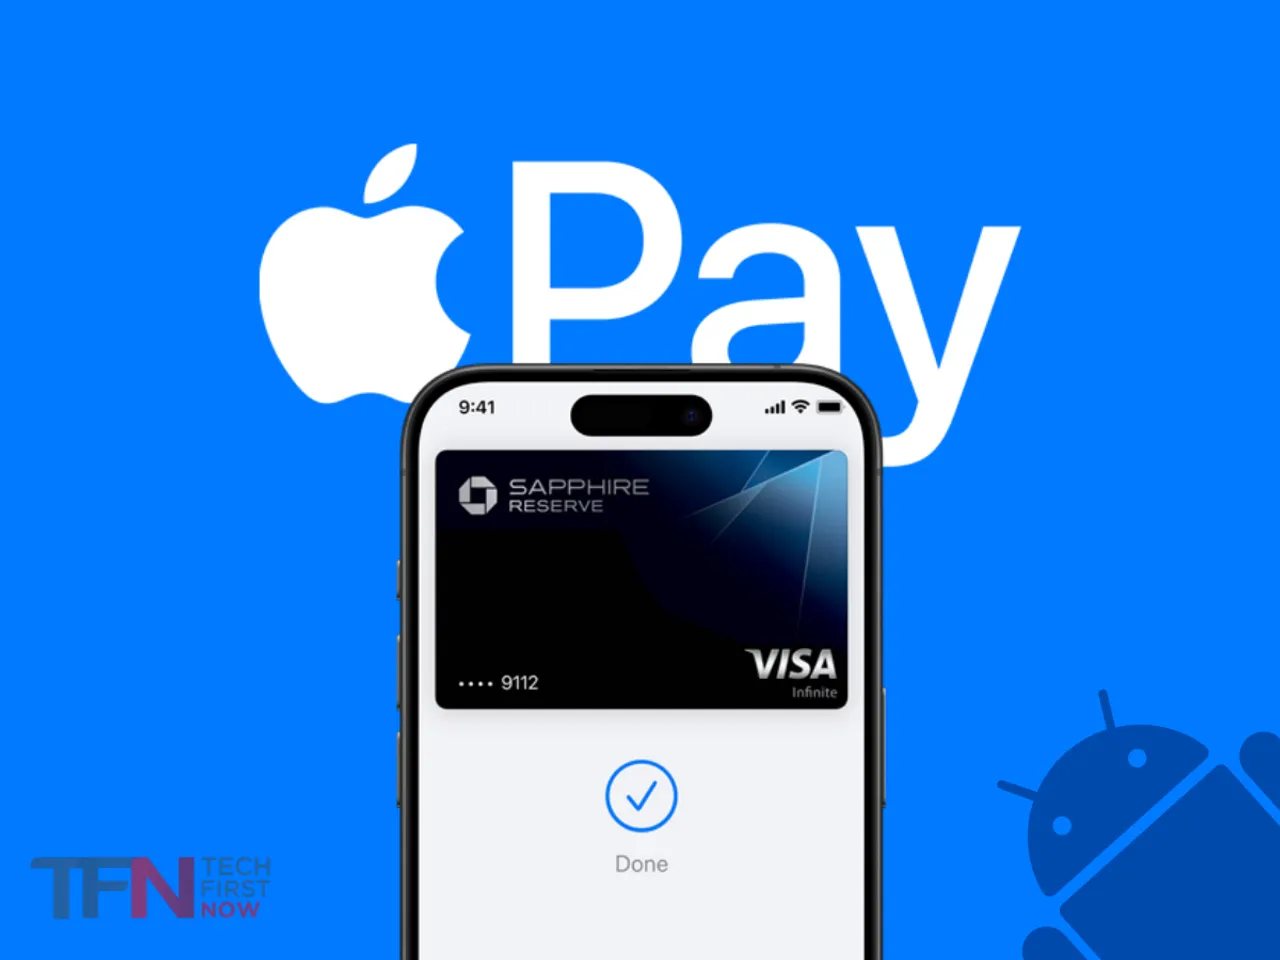 Can you use Apple Pay on Android